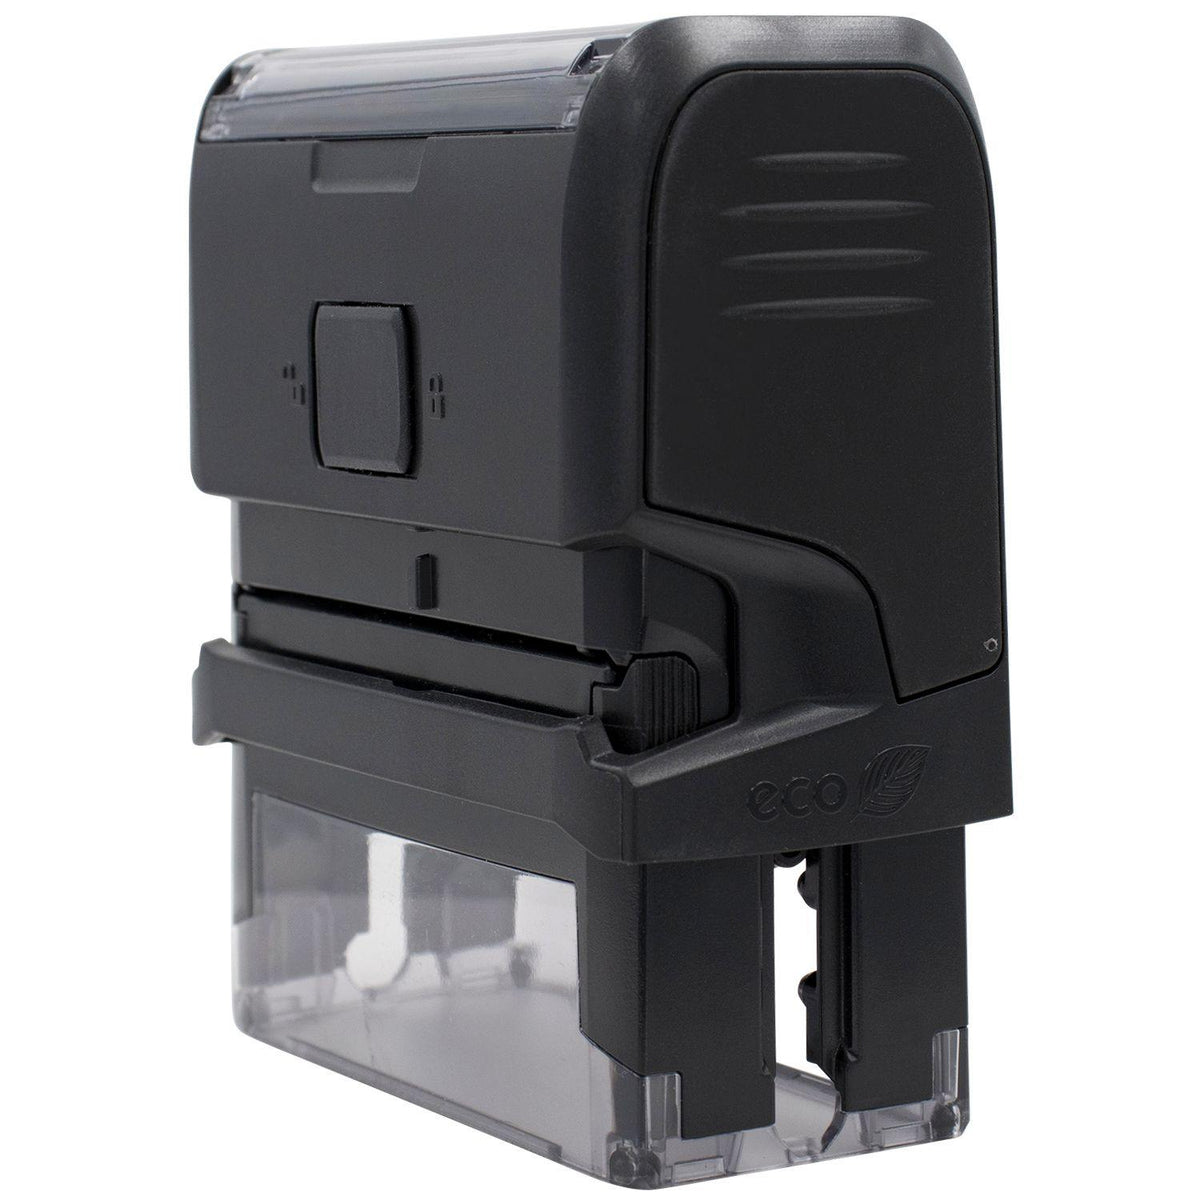 Self Inking Home Equity Stamp - Engineer Seal Stamps - Brand_Trodat, Impression Size_Small, Stamp Type_Self-Inking Stamp, Type of Use_Finance